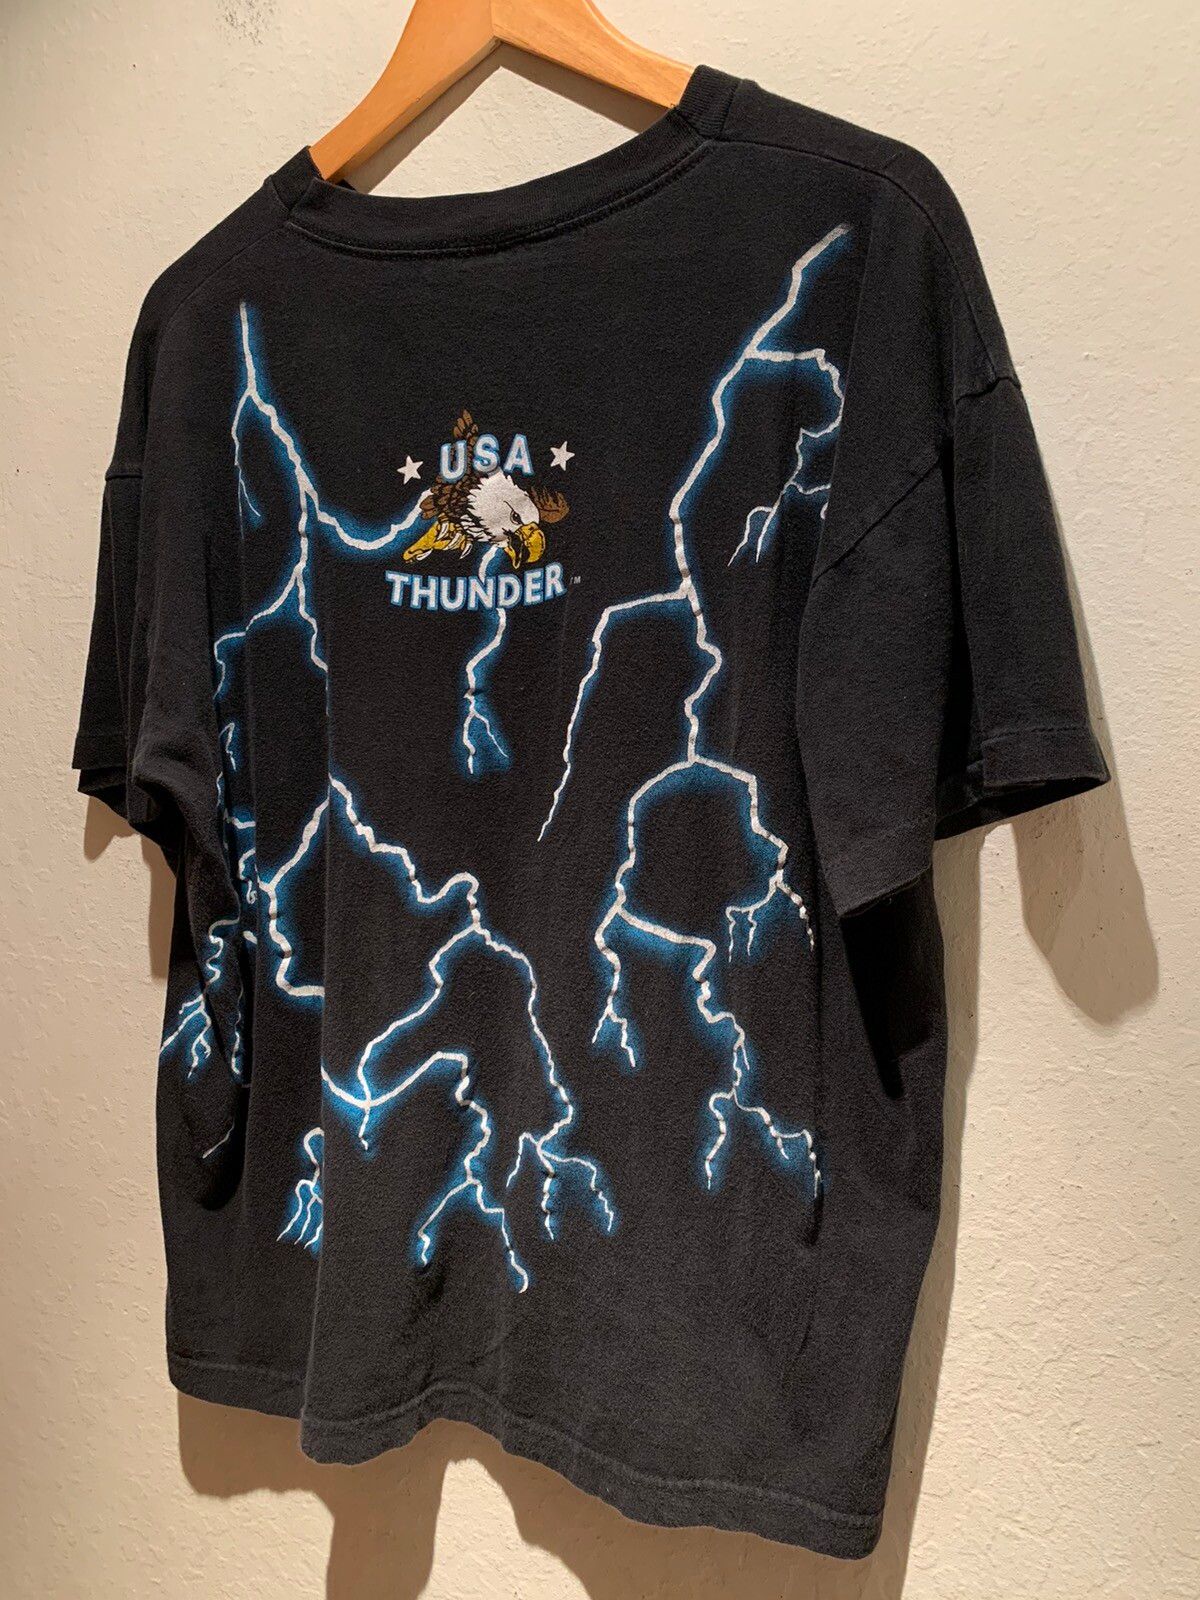 Vintage RARE* Vintage American USA Thunder Wolf Strong Survive Shirt Size US L / EU 52-54 / 3 - 2 Preview